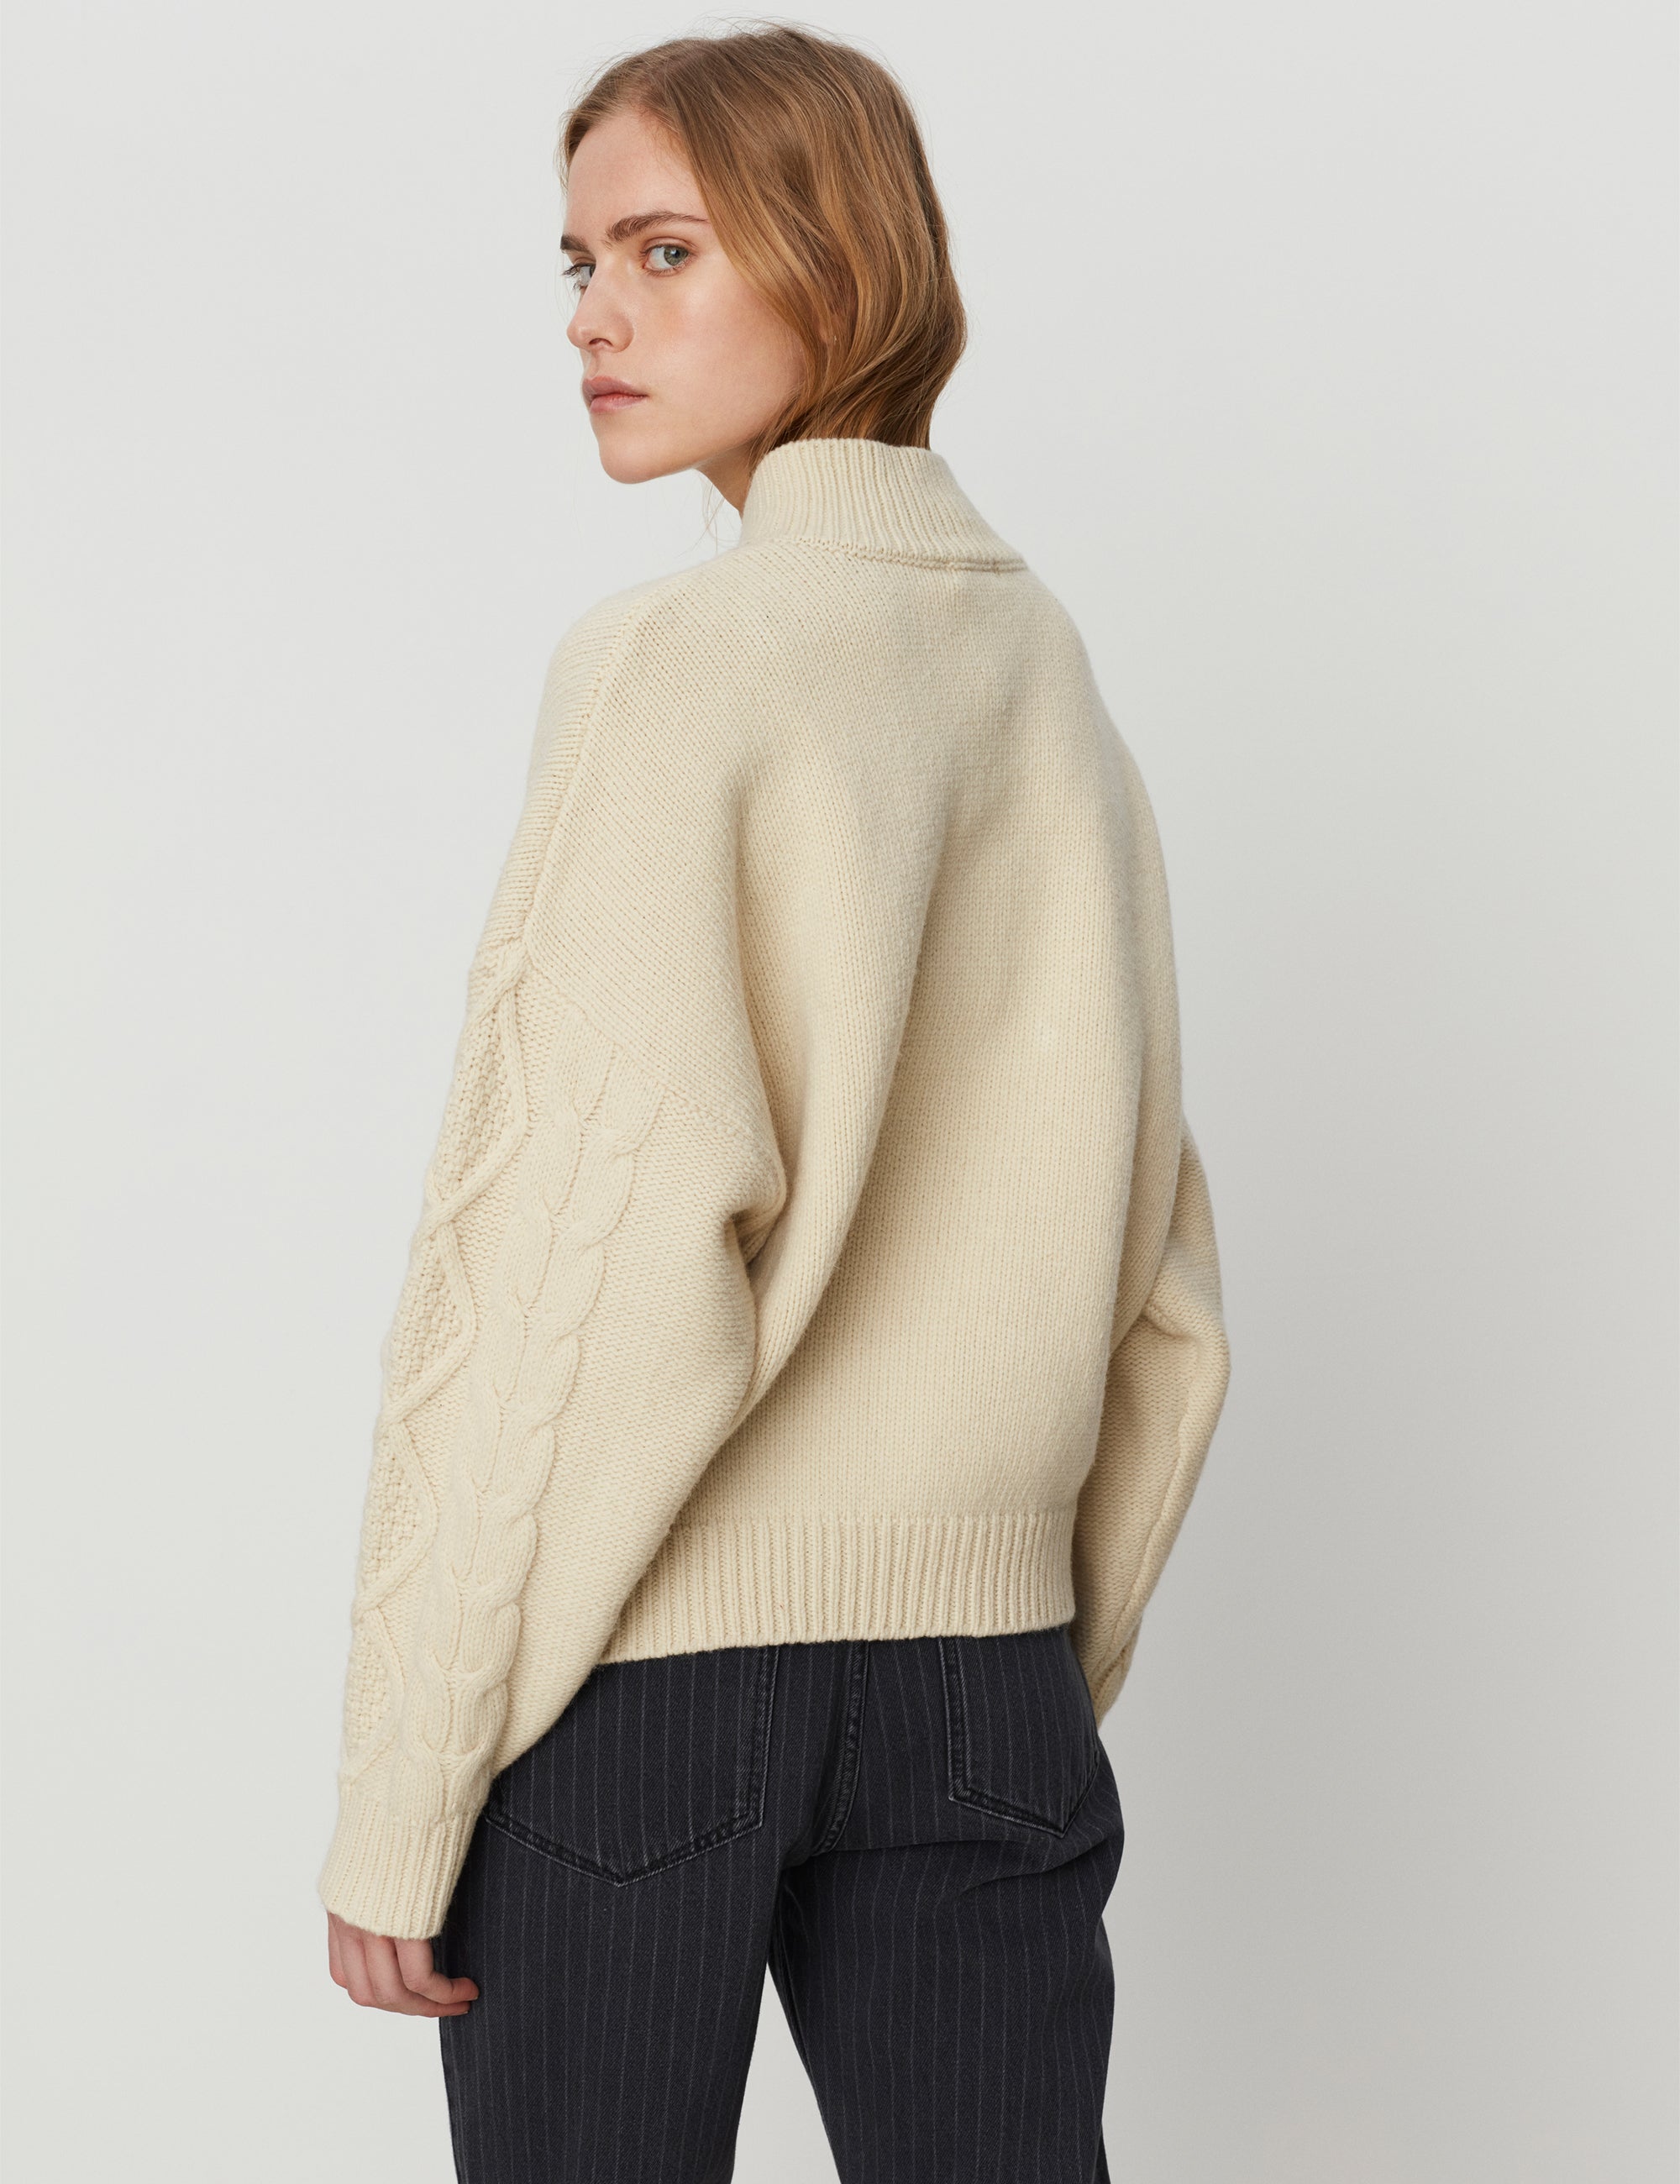 Linden Sweater - Babs The Label